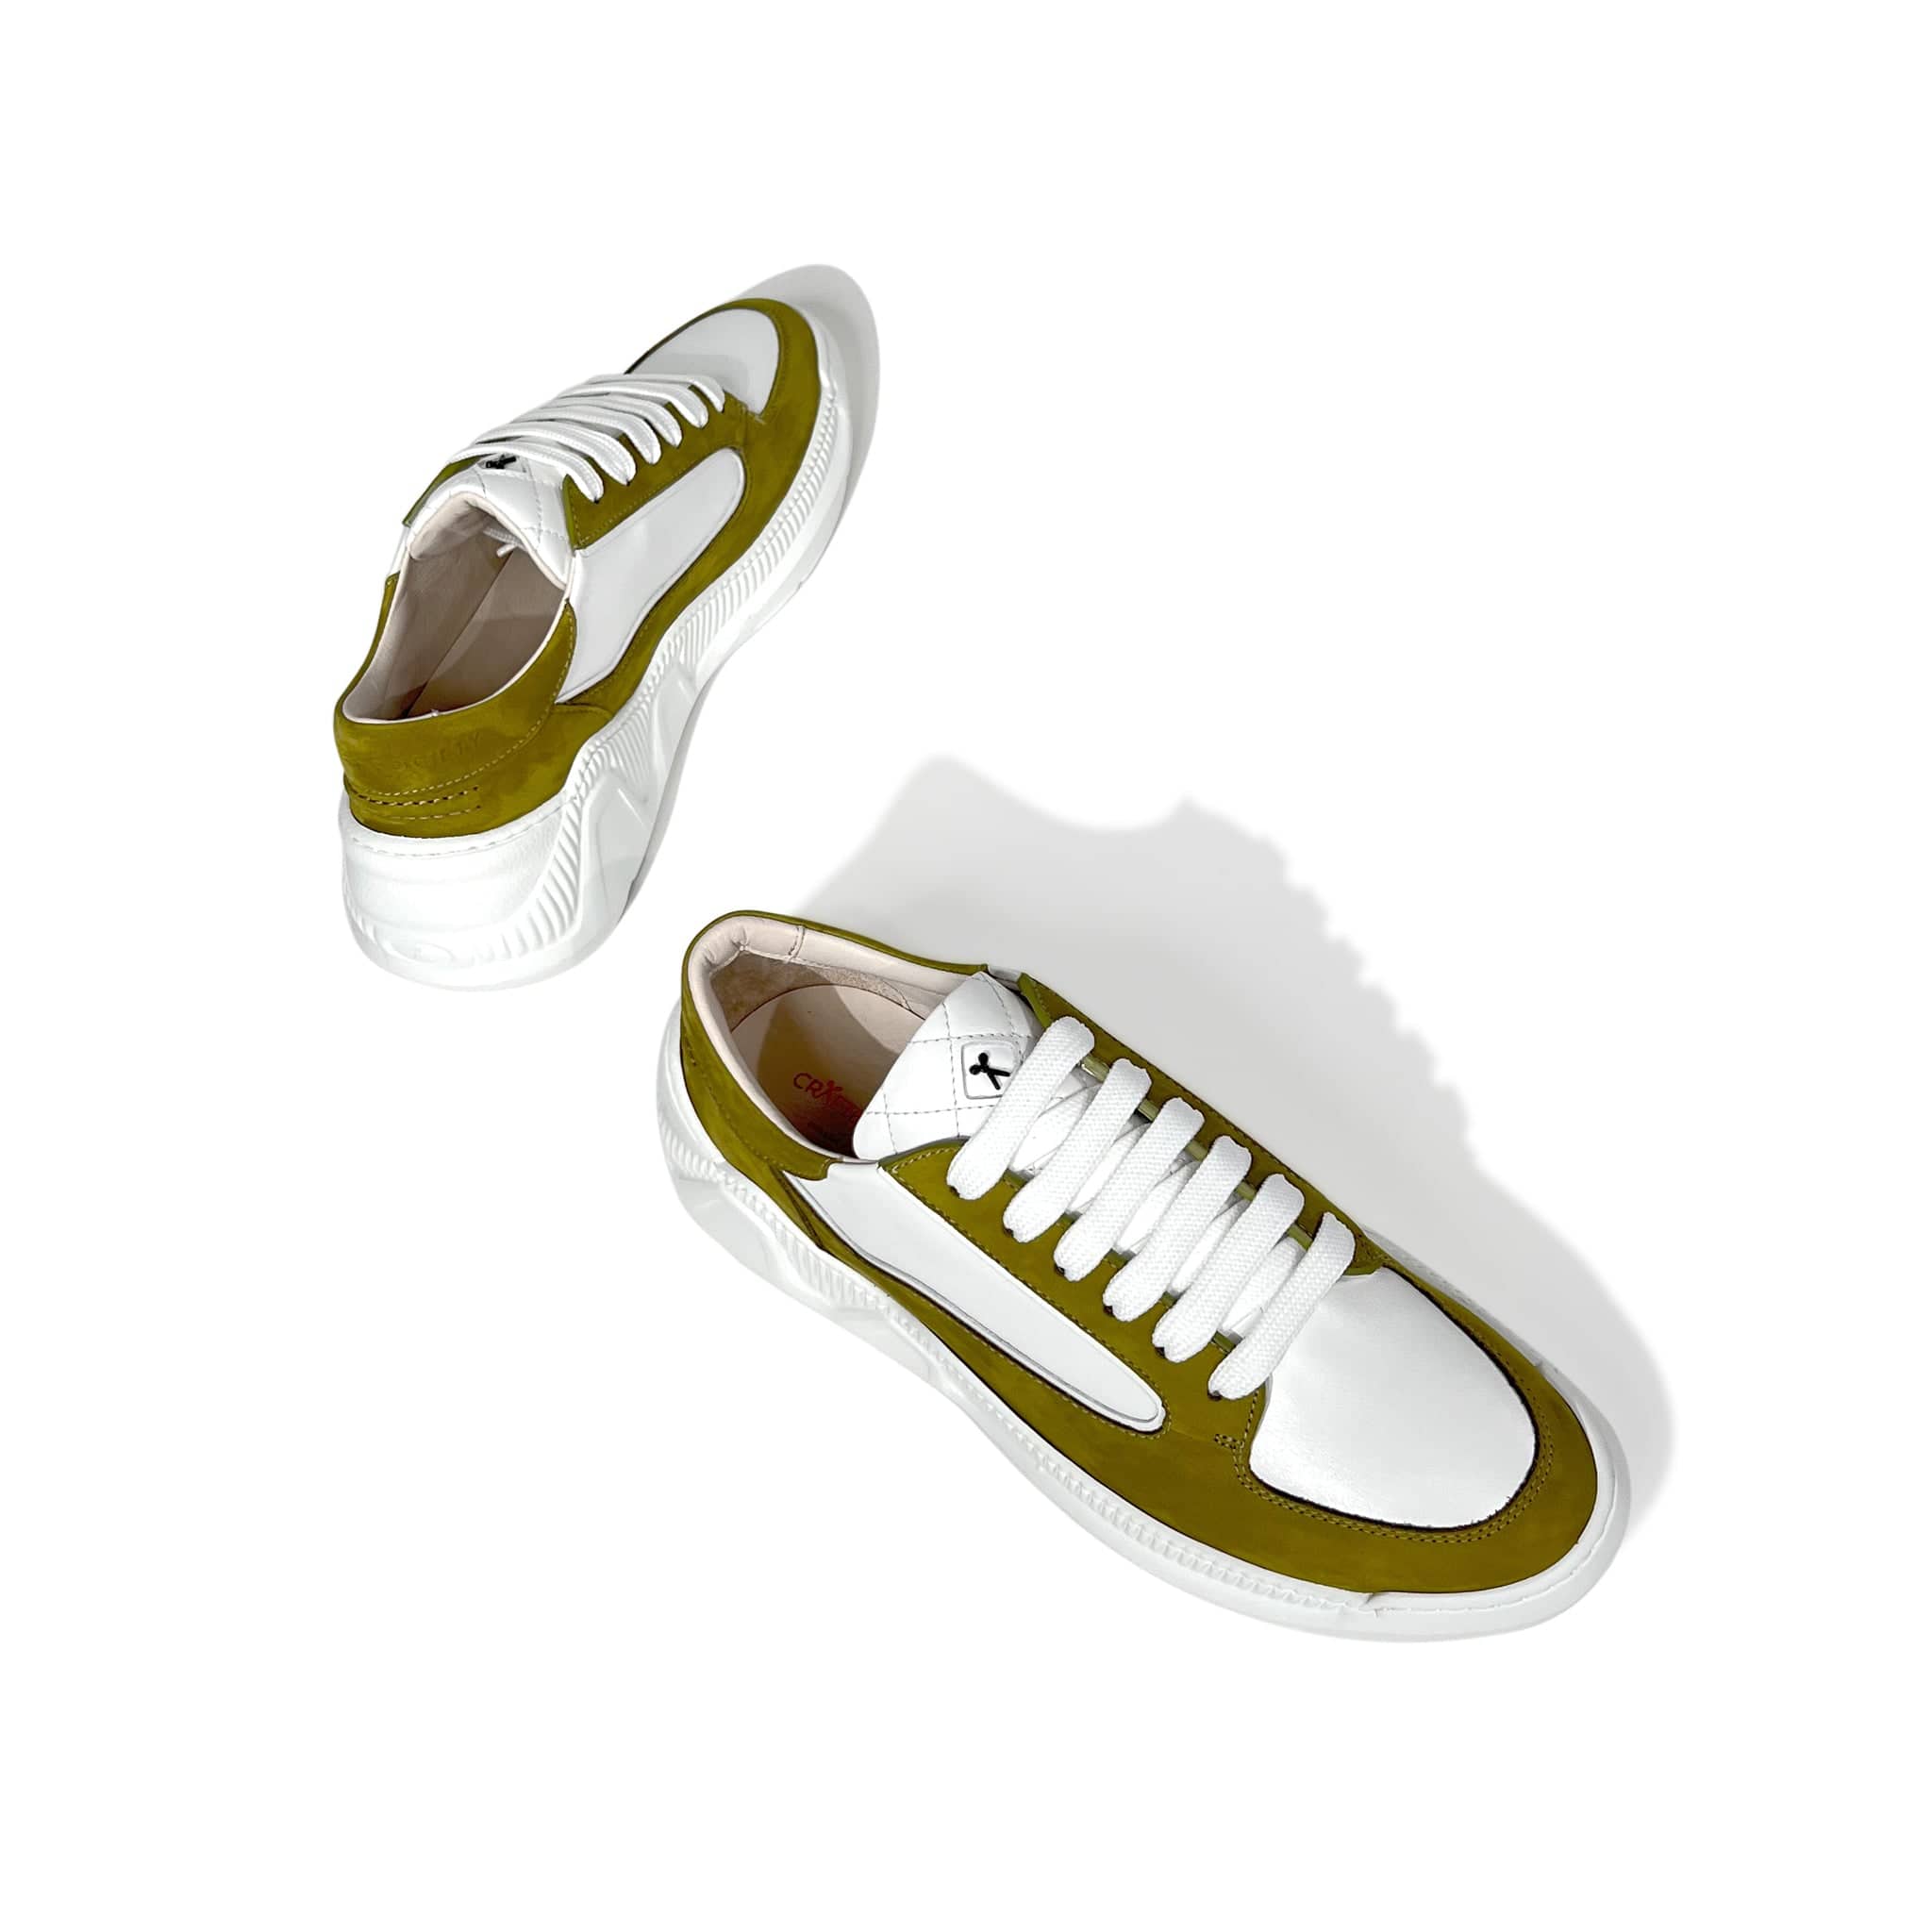 Nesto Low Top Italian Leathern Sneaker | Light Olive and White | White Outsole | Made in Italy